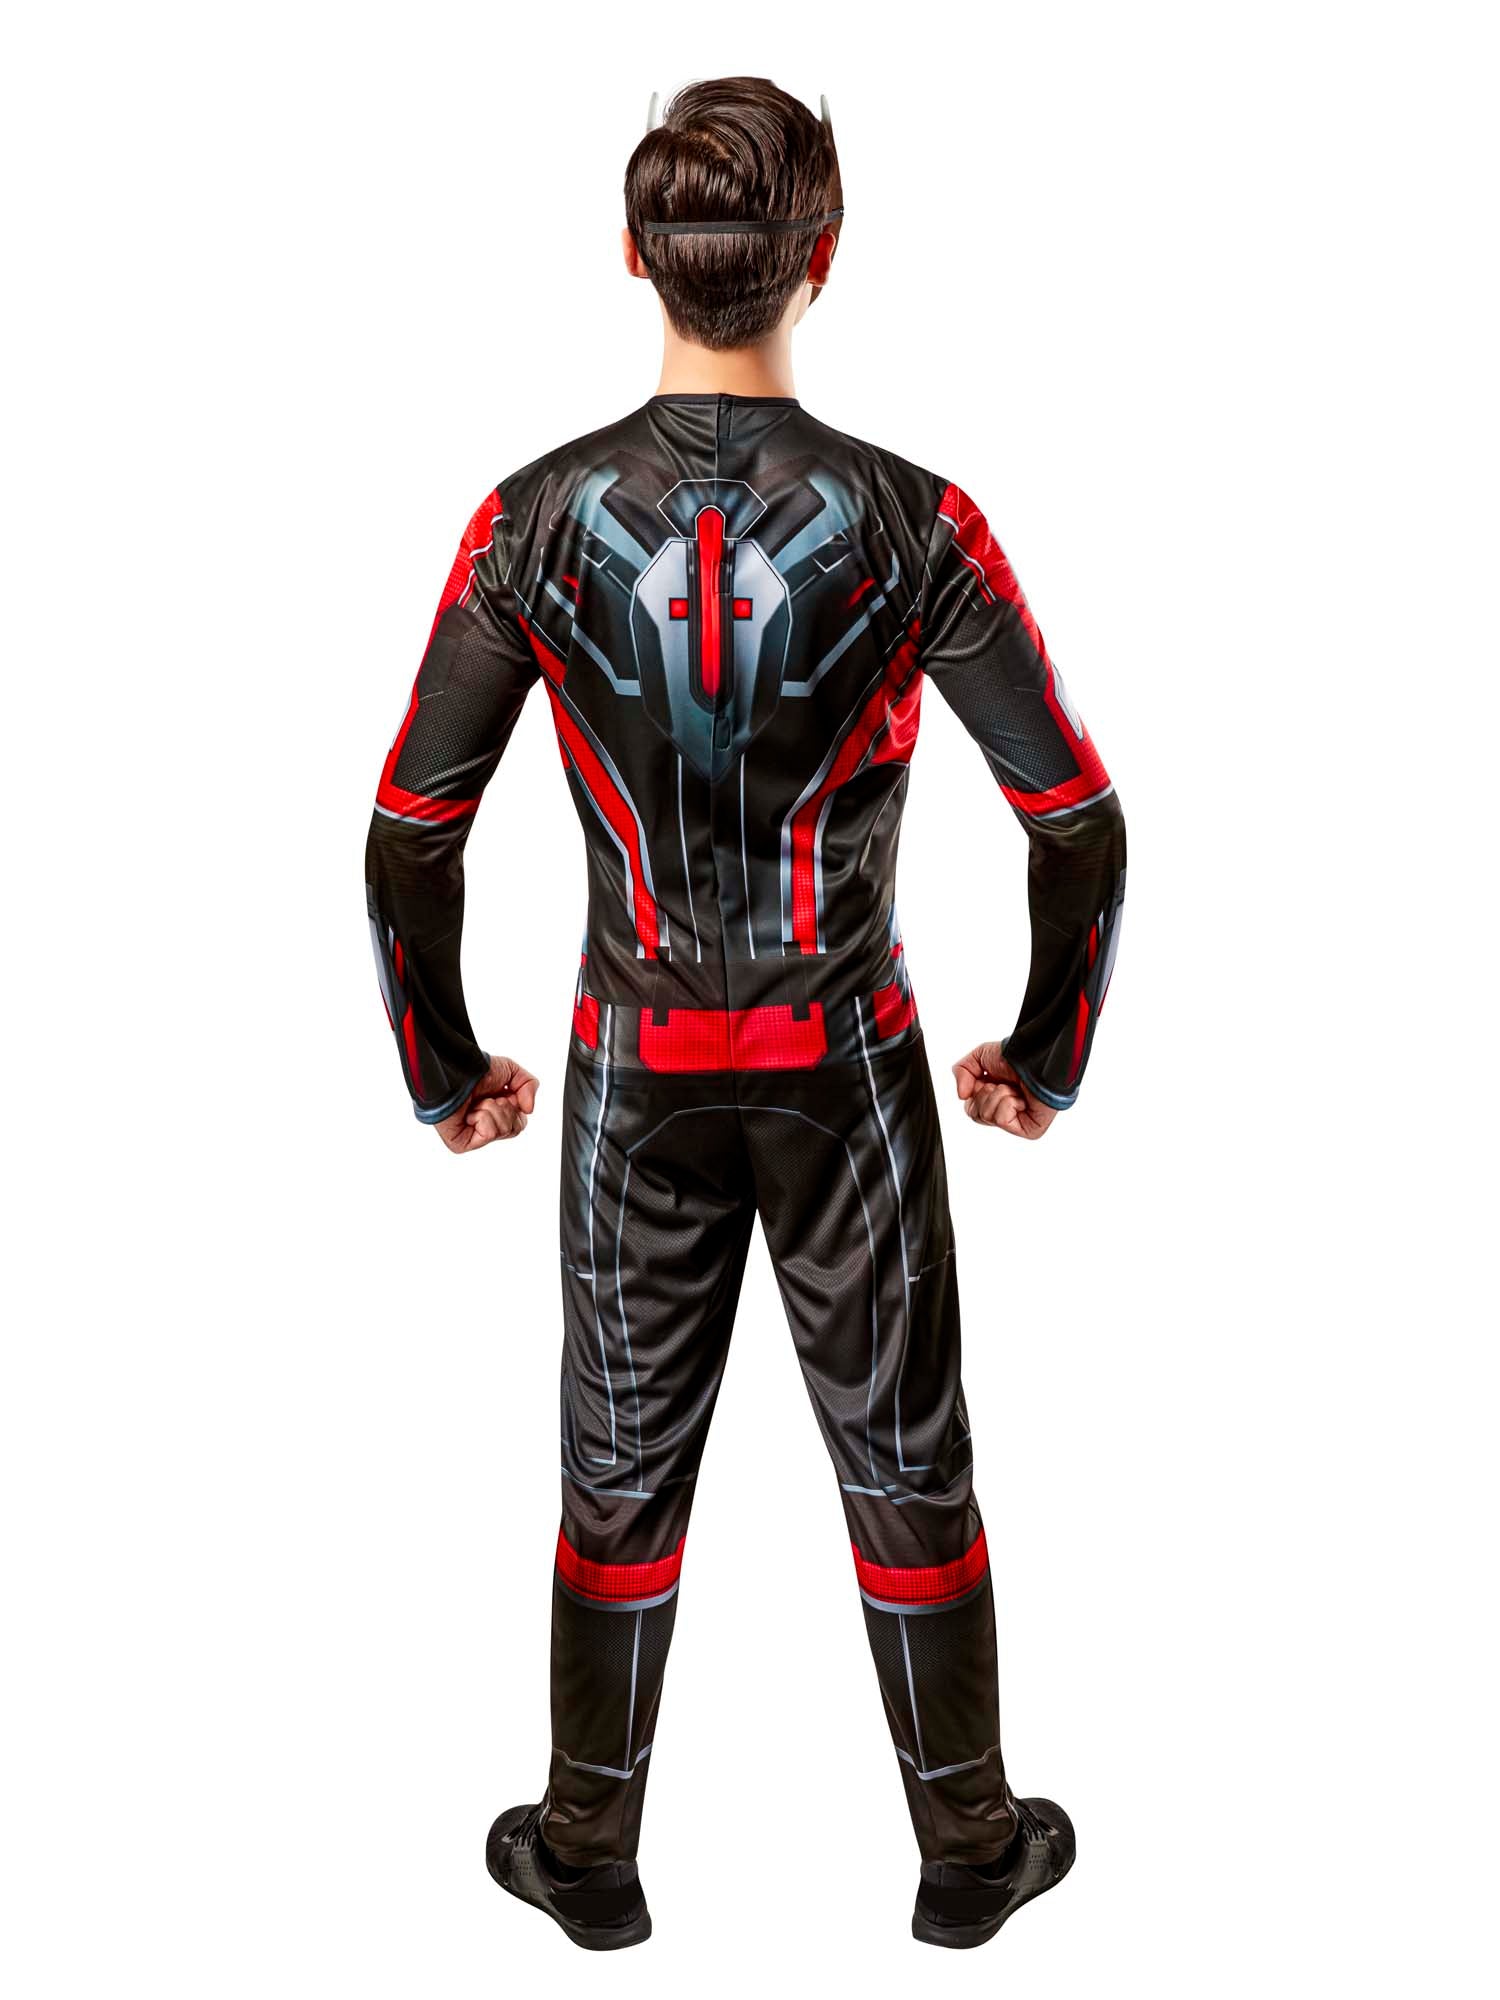 Ant-man, Ant-Man and the Wasp: Quantomania, Ant-Man Quantumania, Ant-Man and the Wasp: Quantomania, Marvel, Adult Costumes, Large, Side